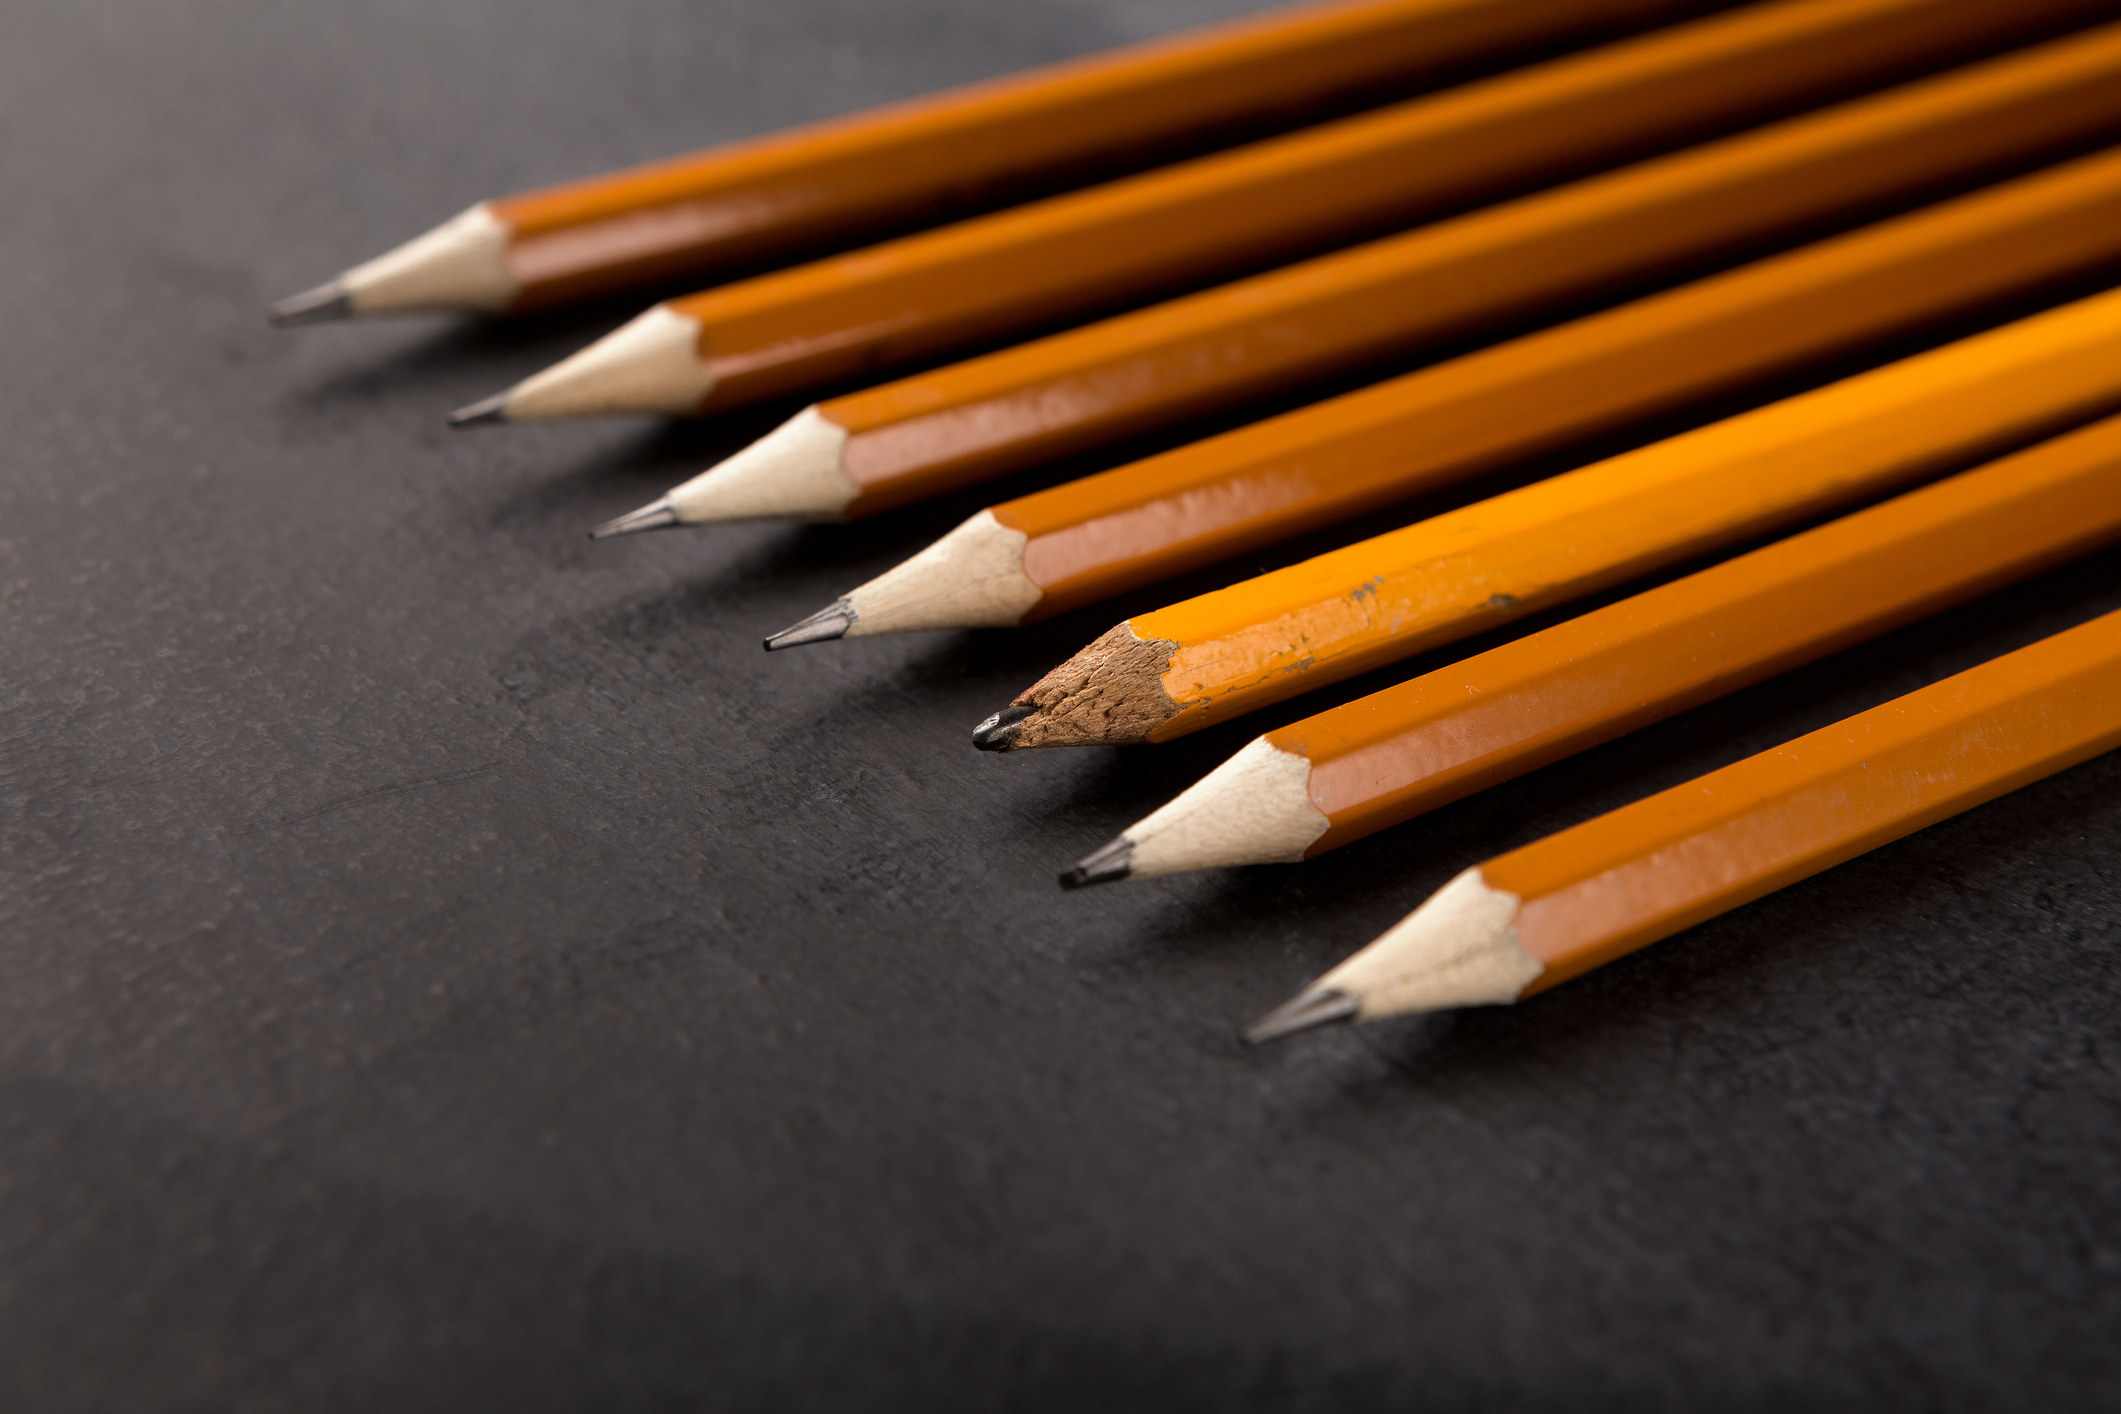 A row of sharpened pencils and one old, dull one